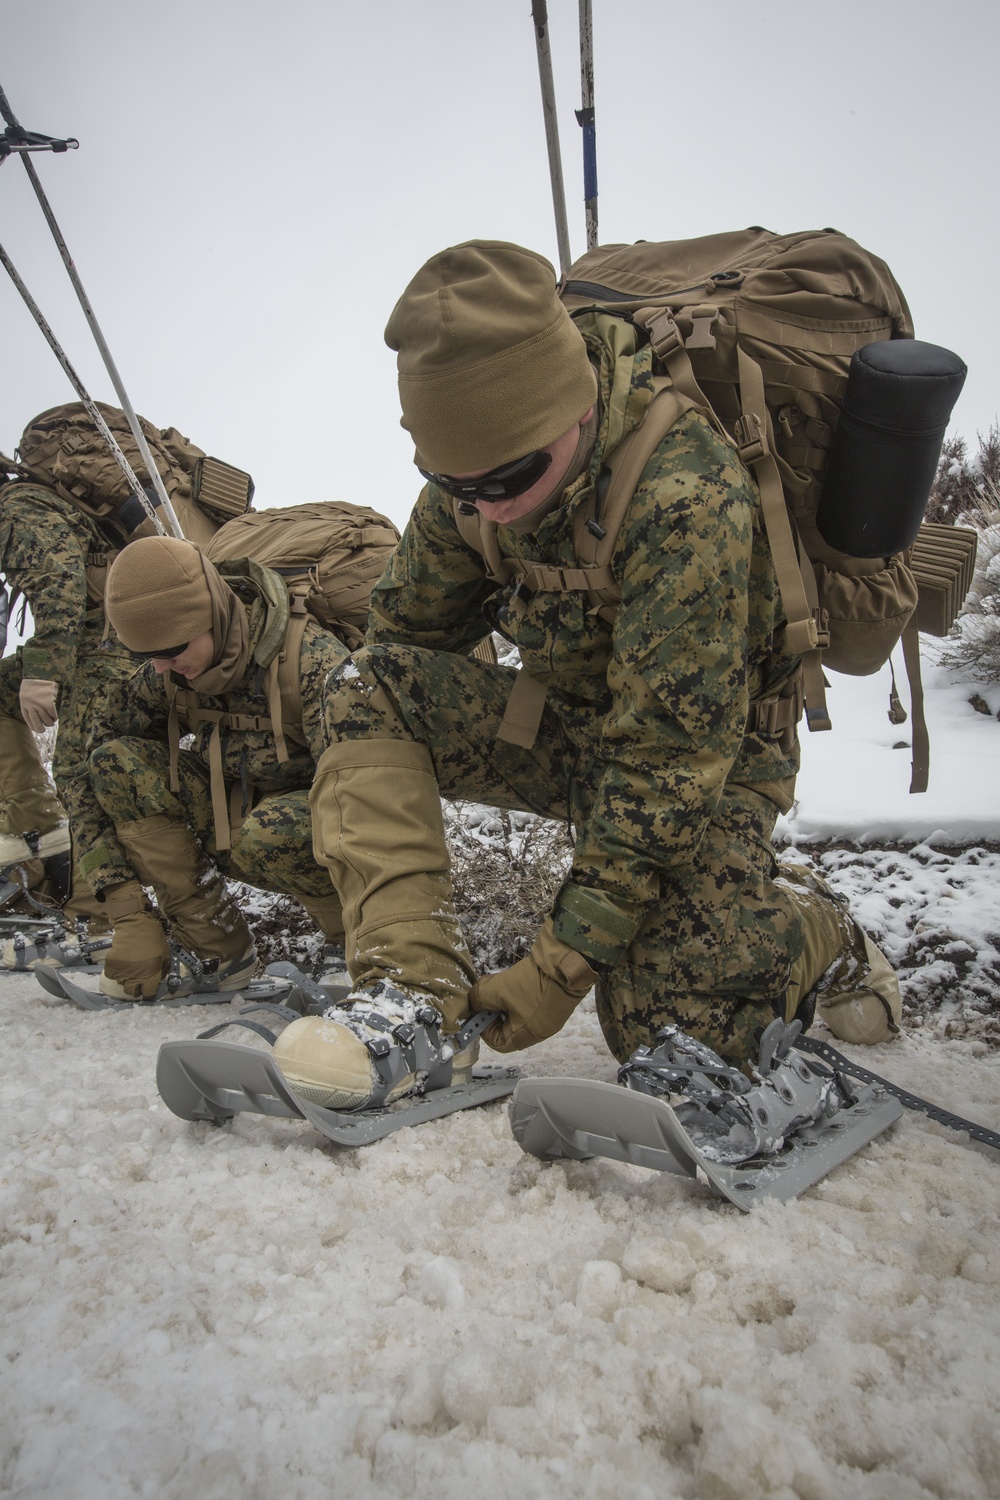 DVIDS - Images - 1st CEB Marines Hike During MTX 2-17 [Image 4 of 5]